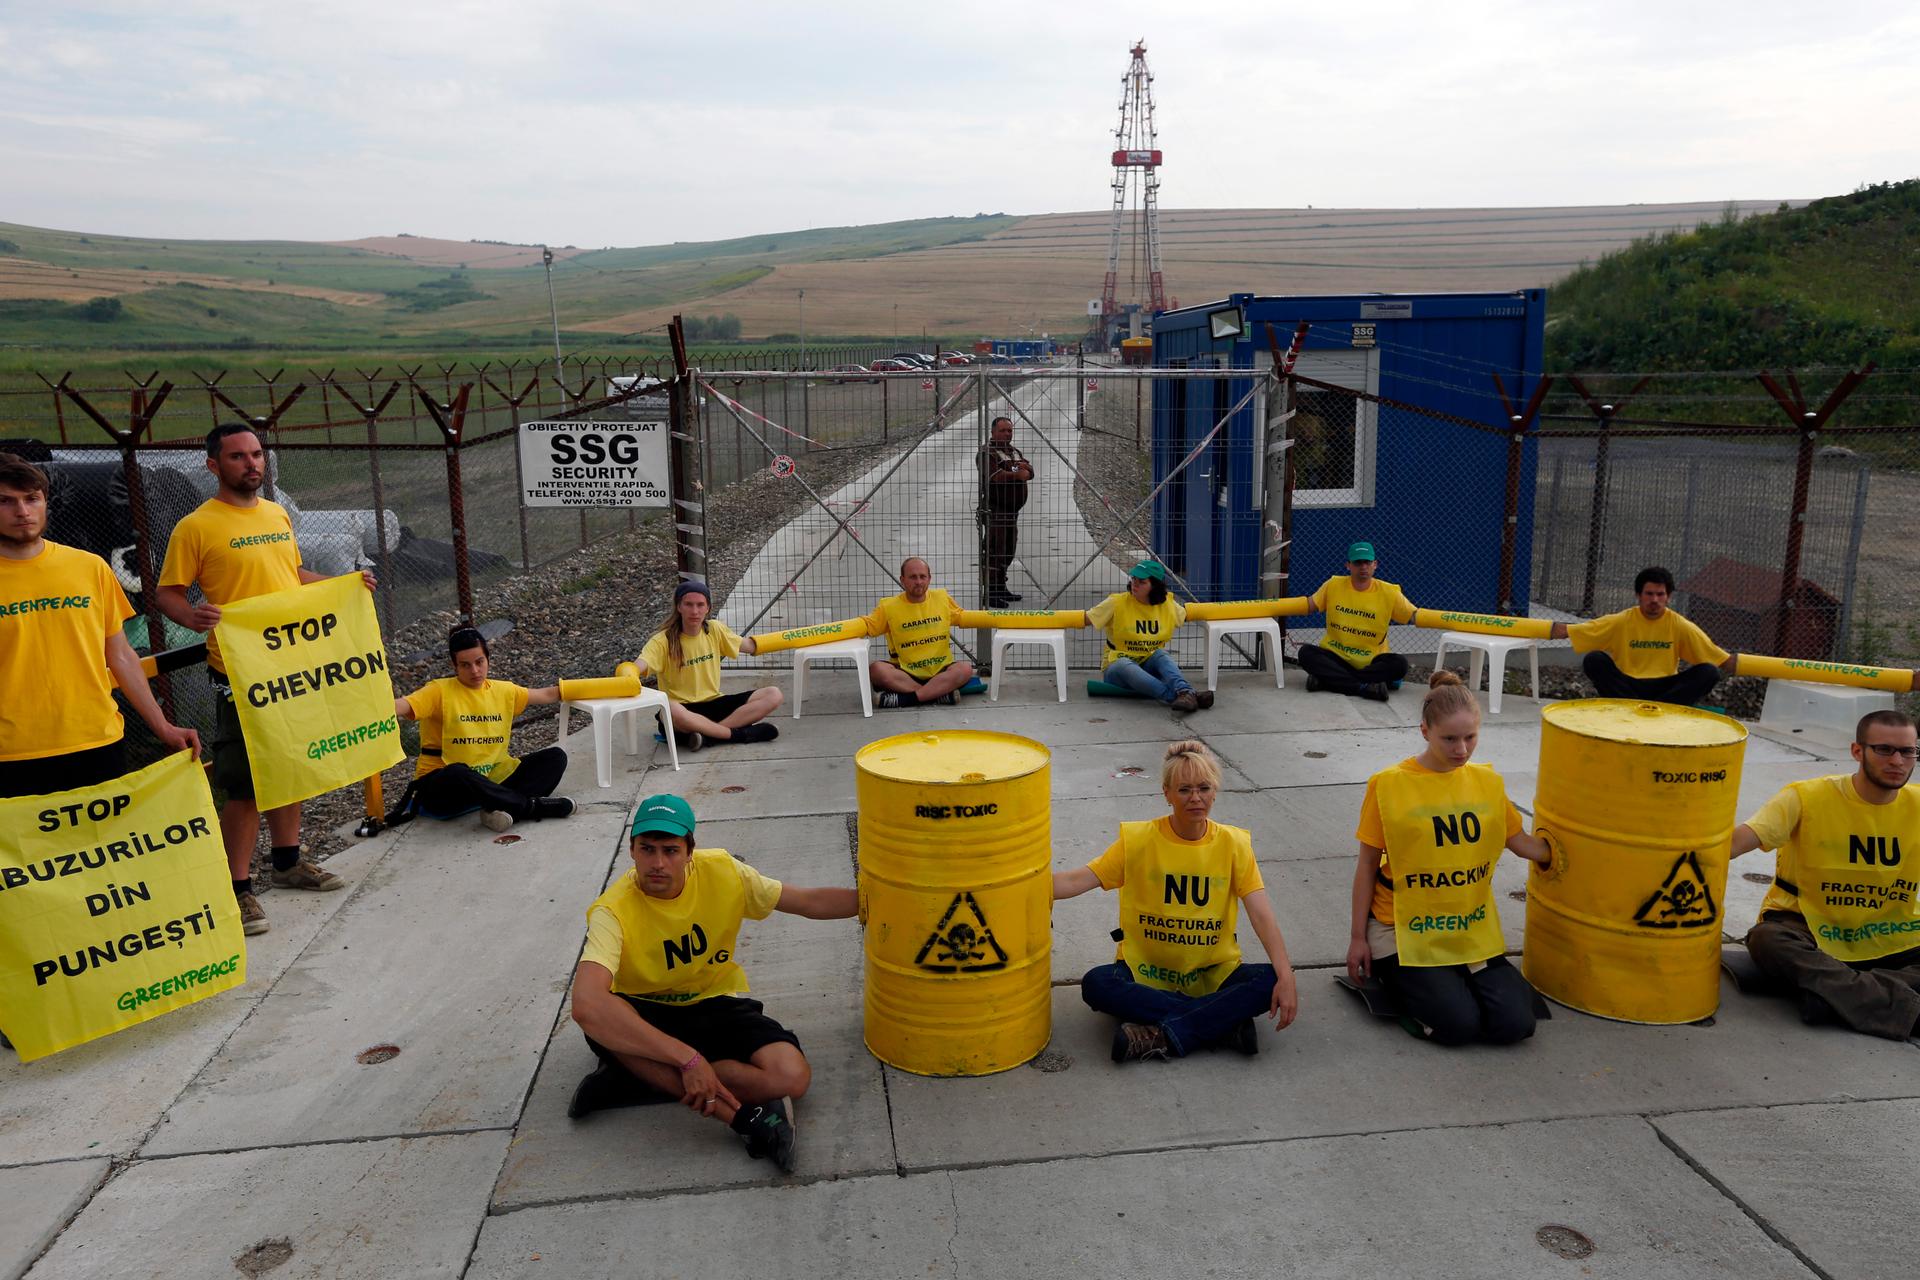 Greenpeace activists sit chained in front of Chevron's drilling site for shale gas during a protest in the village of Pungesti, Romania.